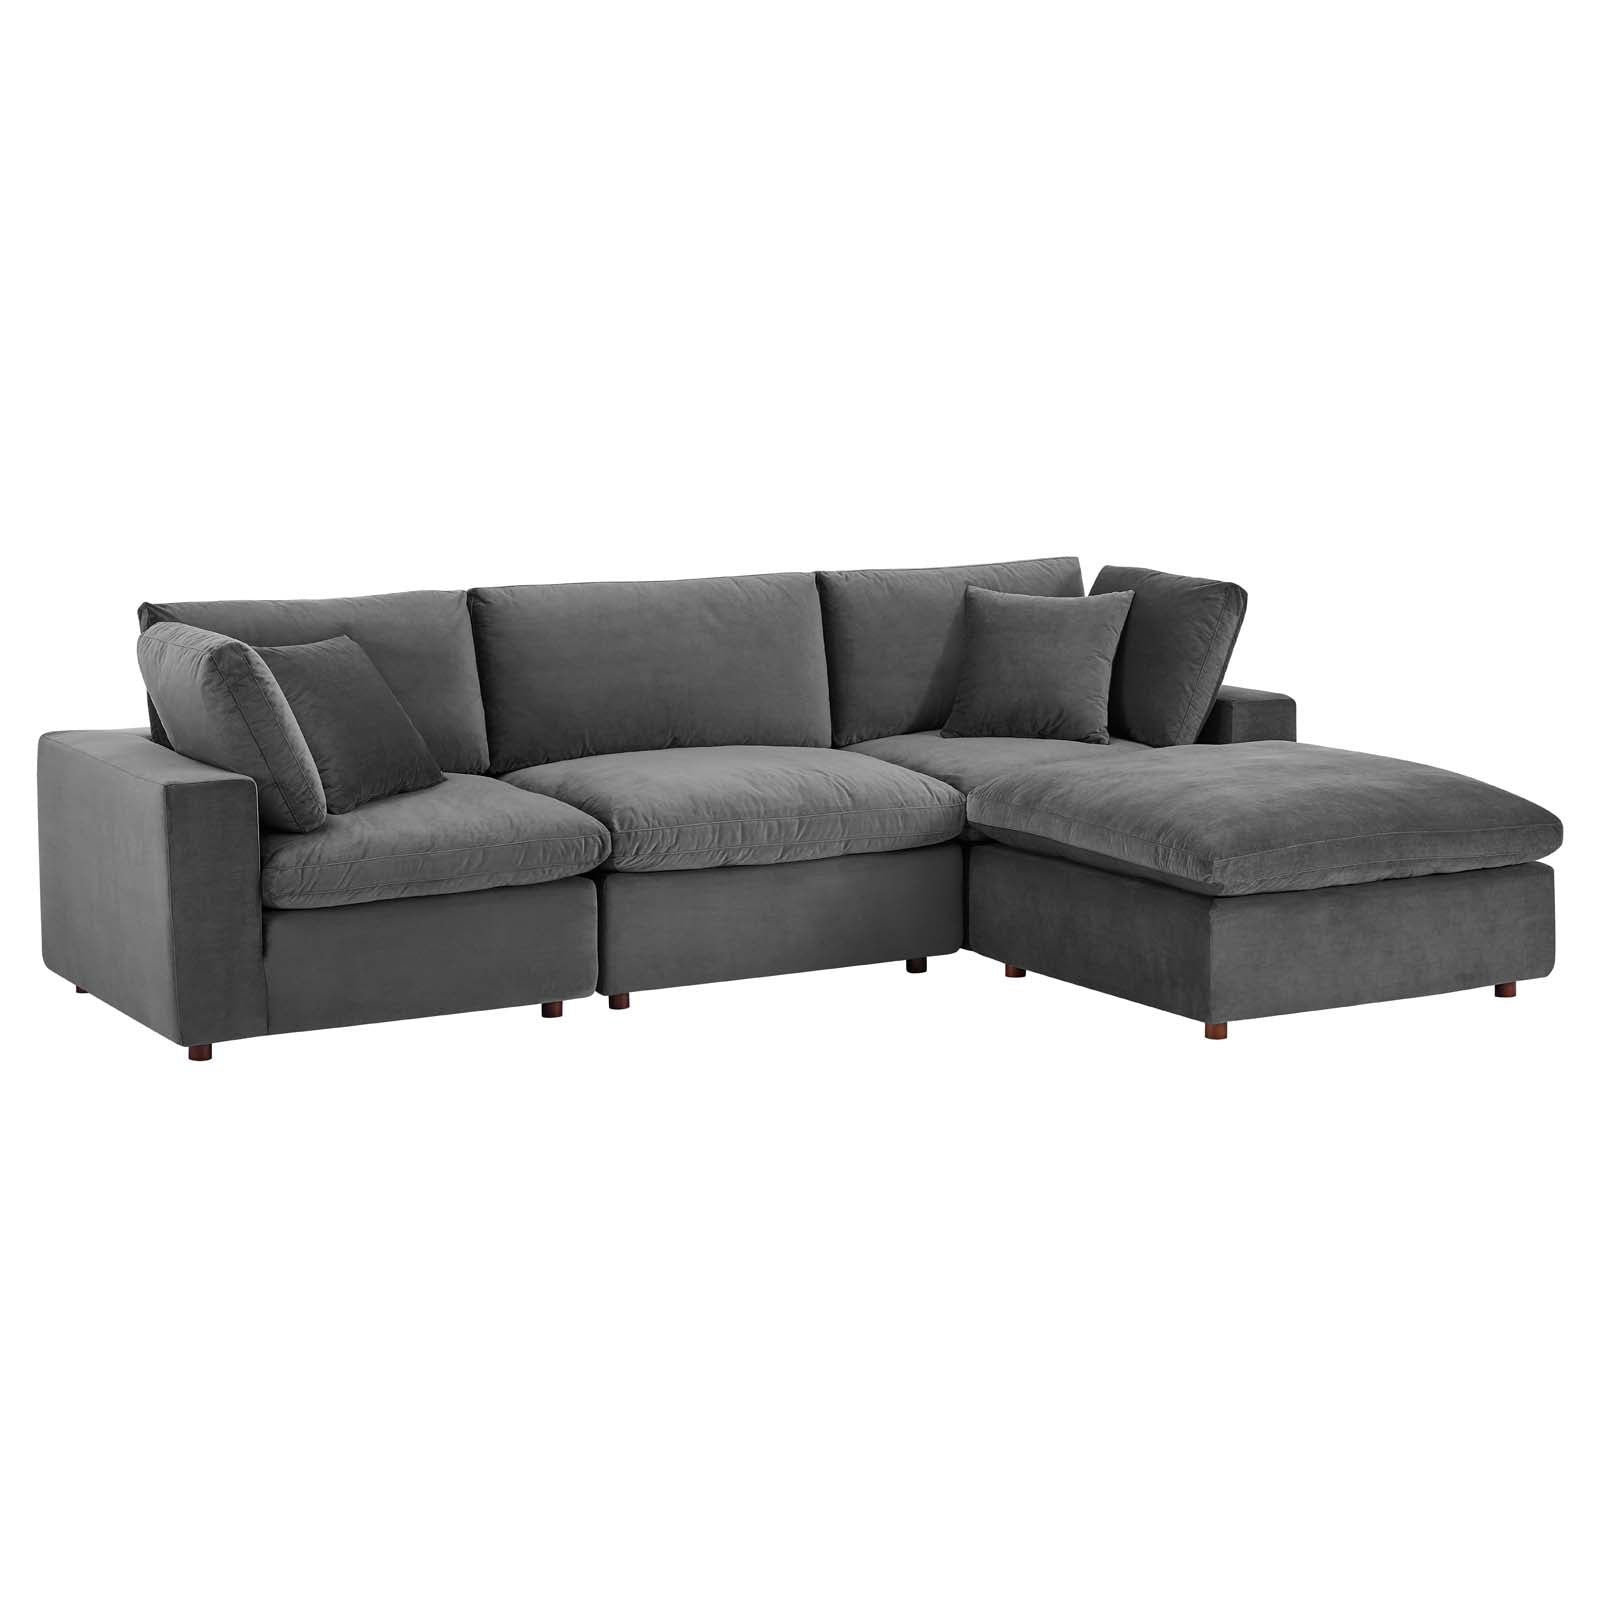 Commix Down Filled Overstuffed Performance Velvet 4-Piece Sectional Sofa-Sectional-Modway-Wall2Wall Furnishings